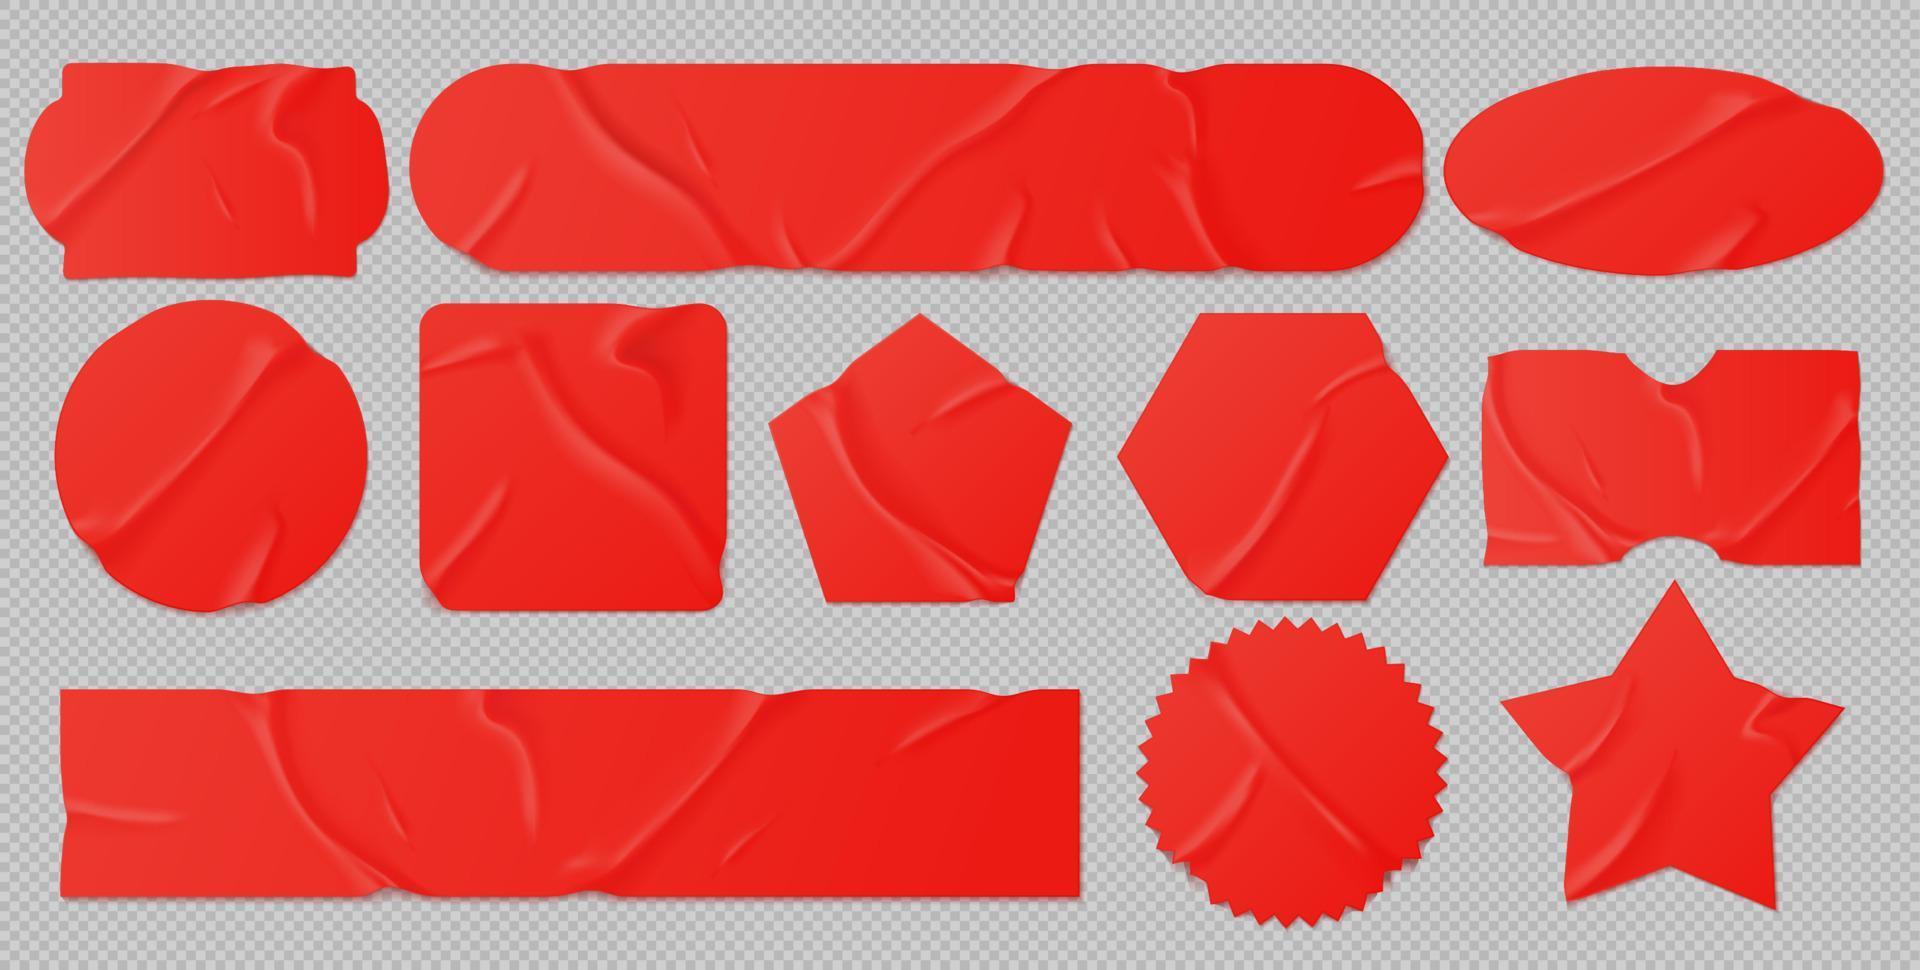 Red glued stickers, crumpled paper patches mockup vector